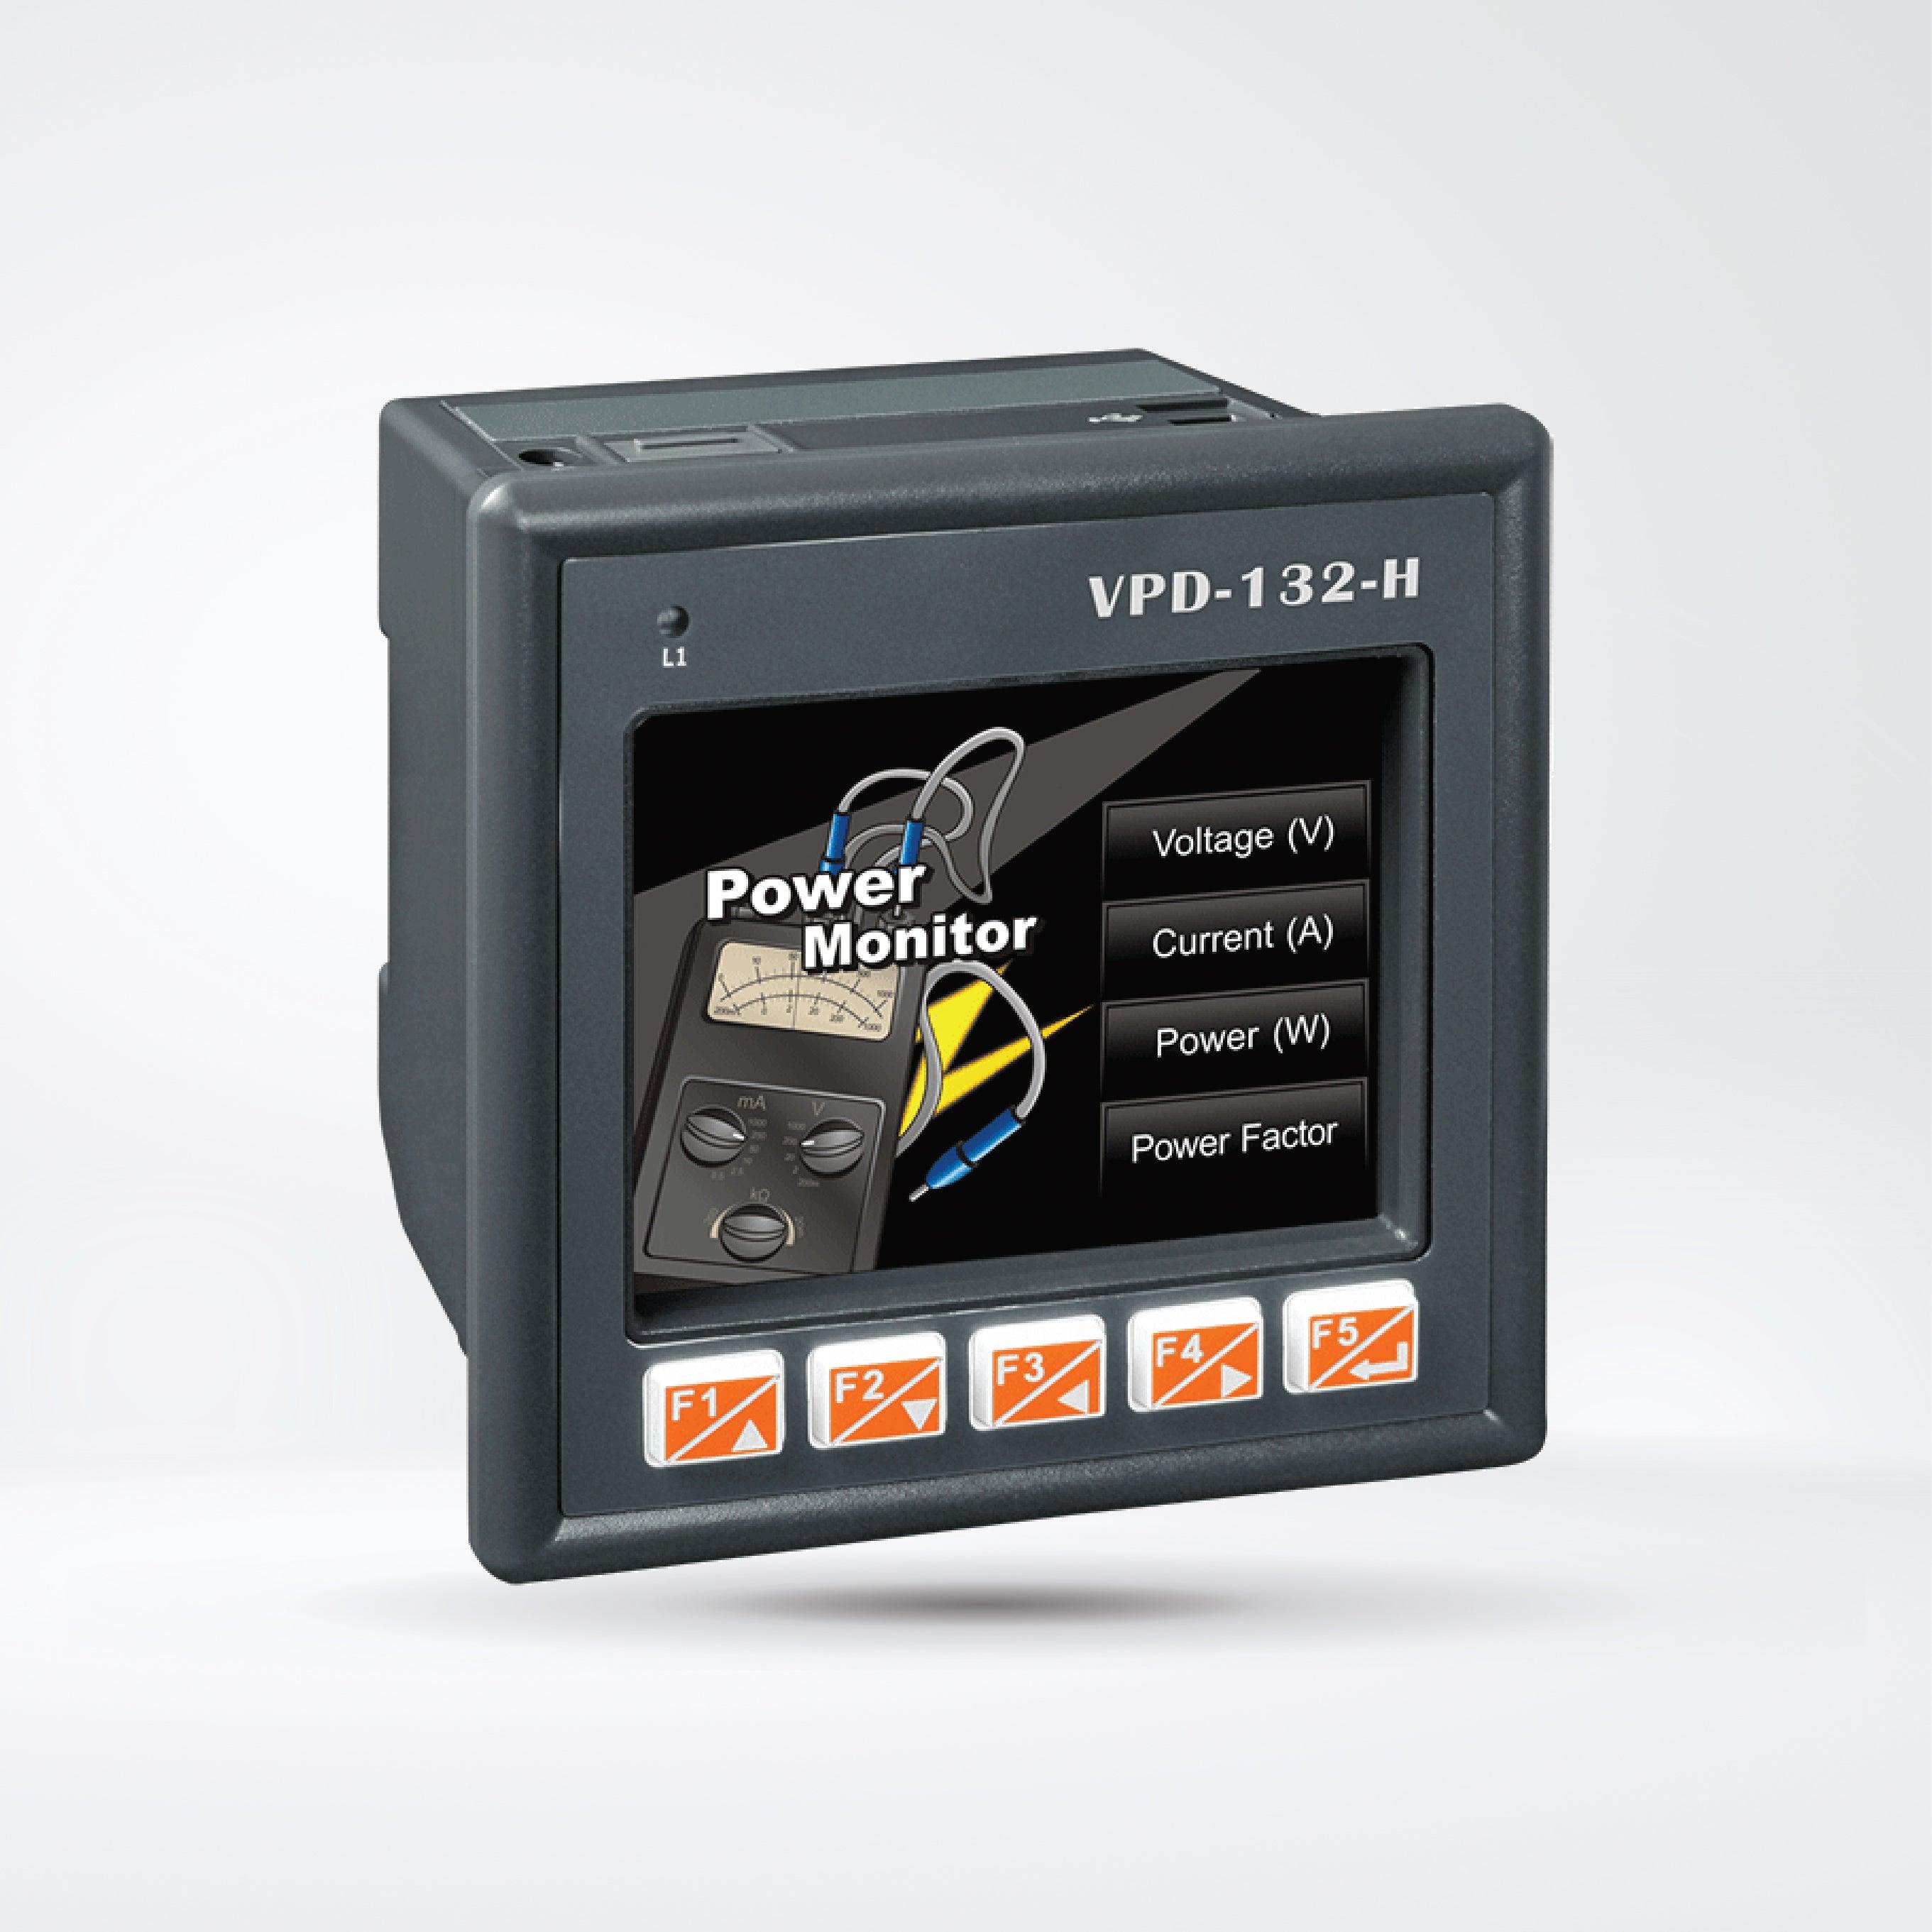 VPD-132-H 3.5" Touch HMI Device with 2 x RS-232/RS-485 and Rubber Keypad - Riverplus